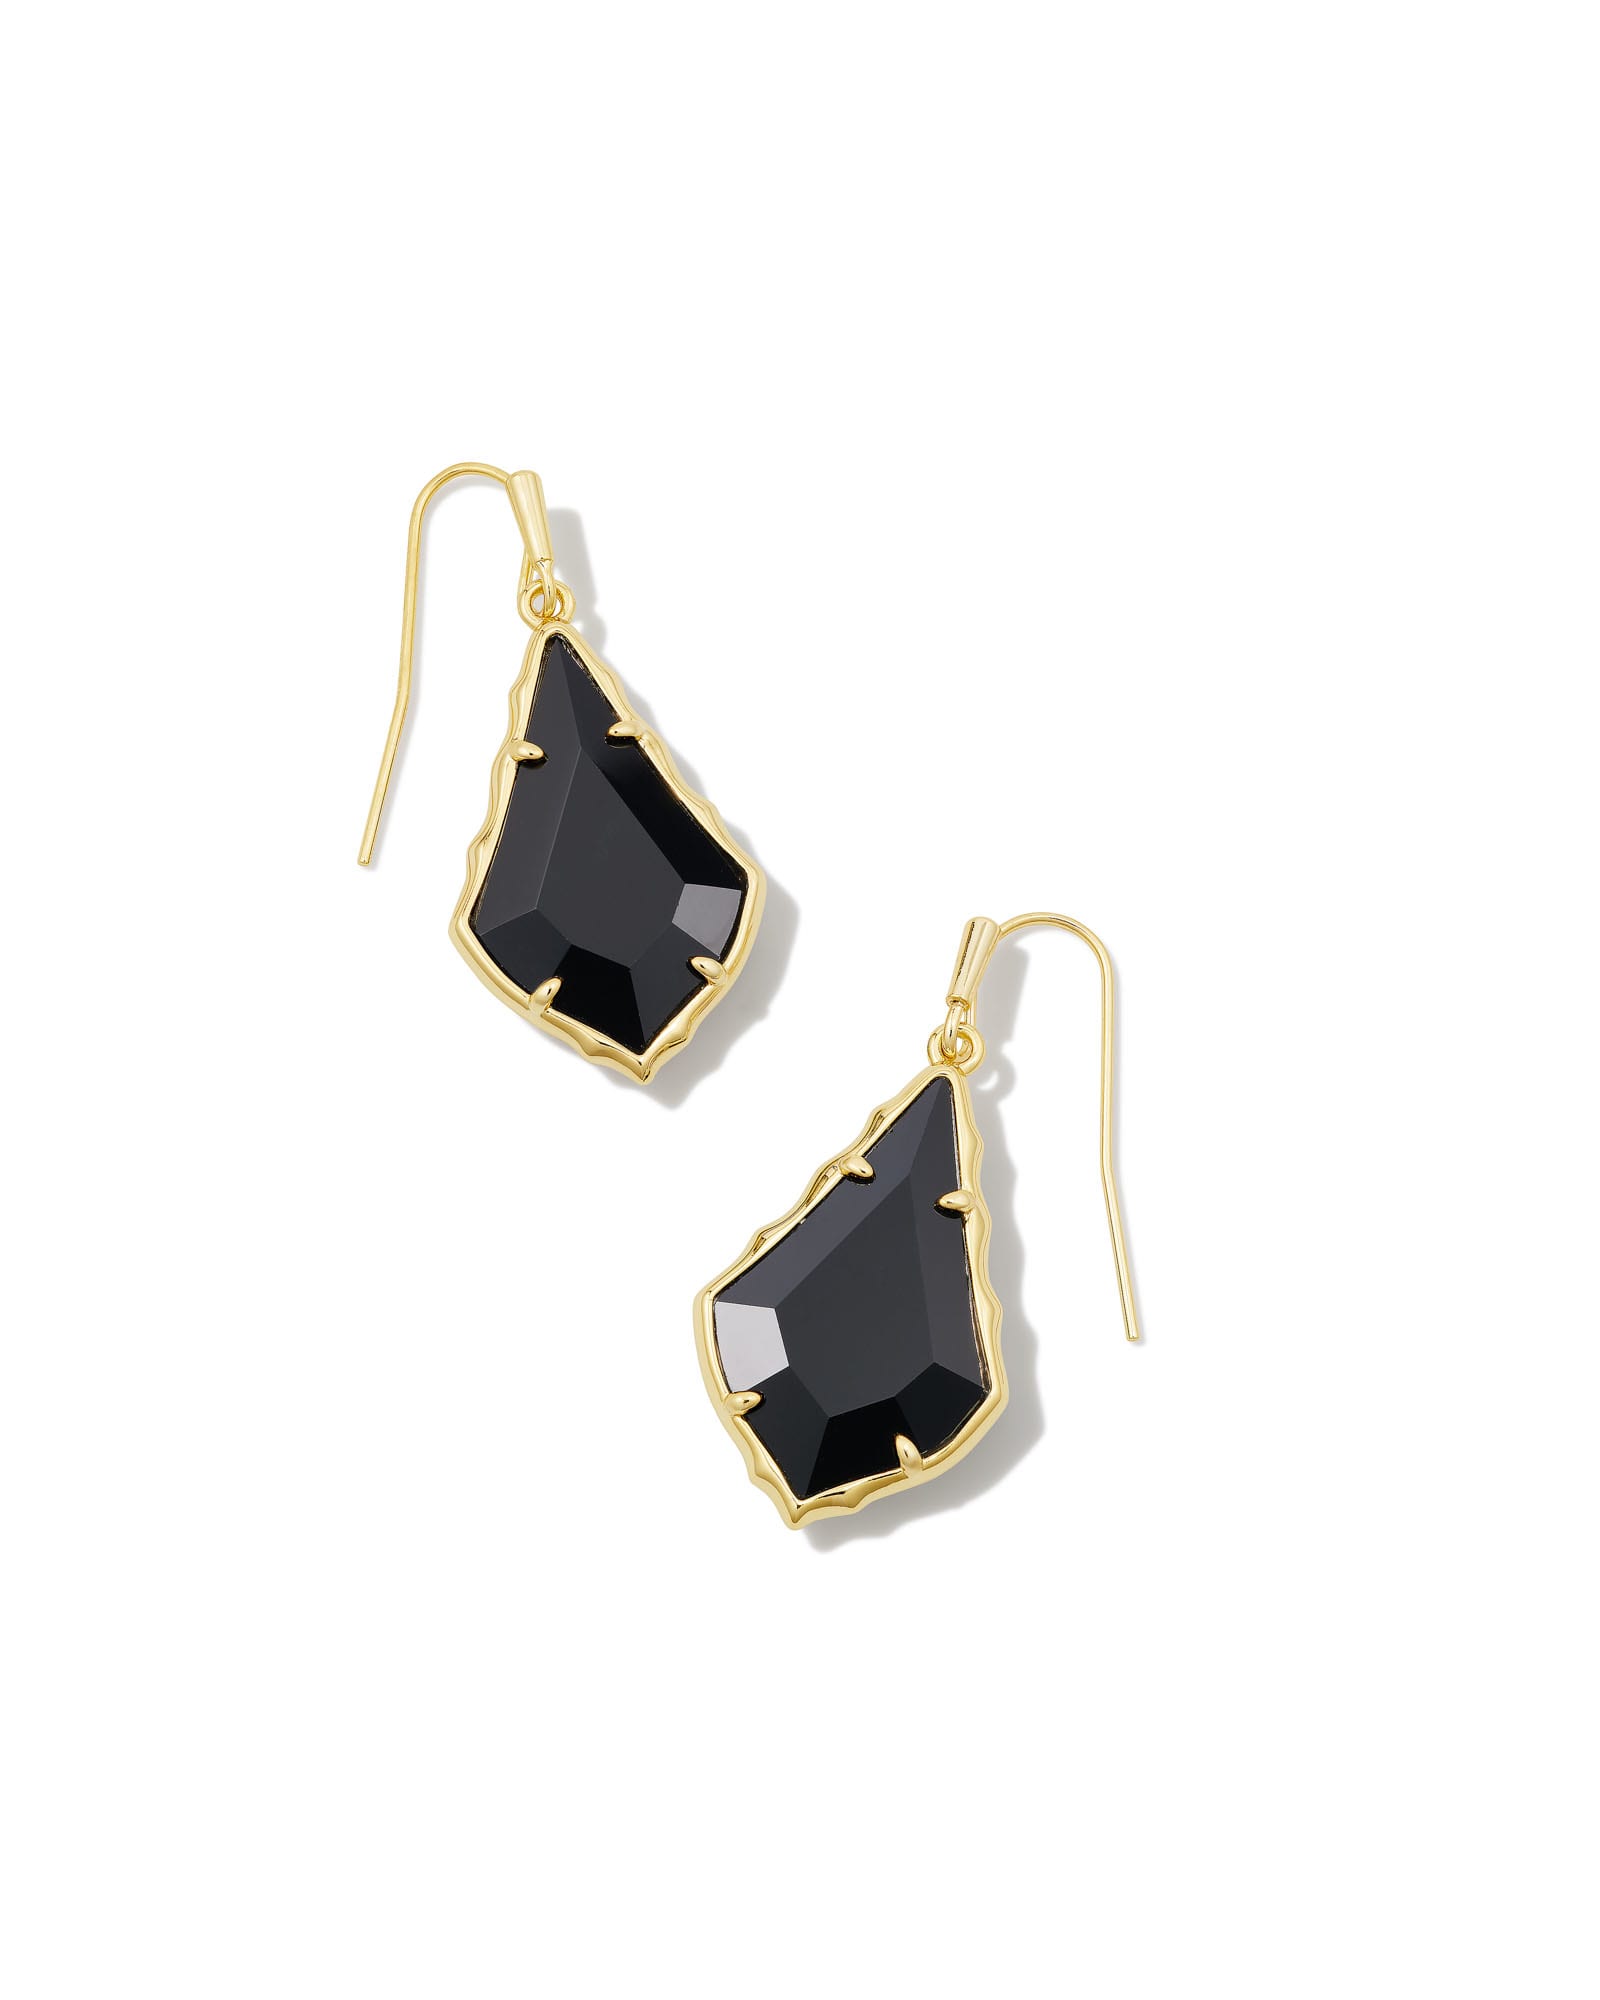 Kendra Scott Small Faceted Alex Gold Drop Earrings in Black Opaque | Glass